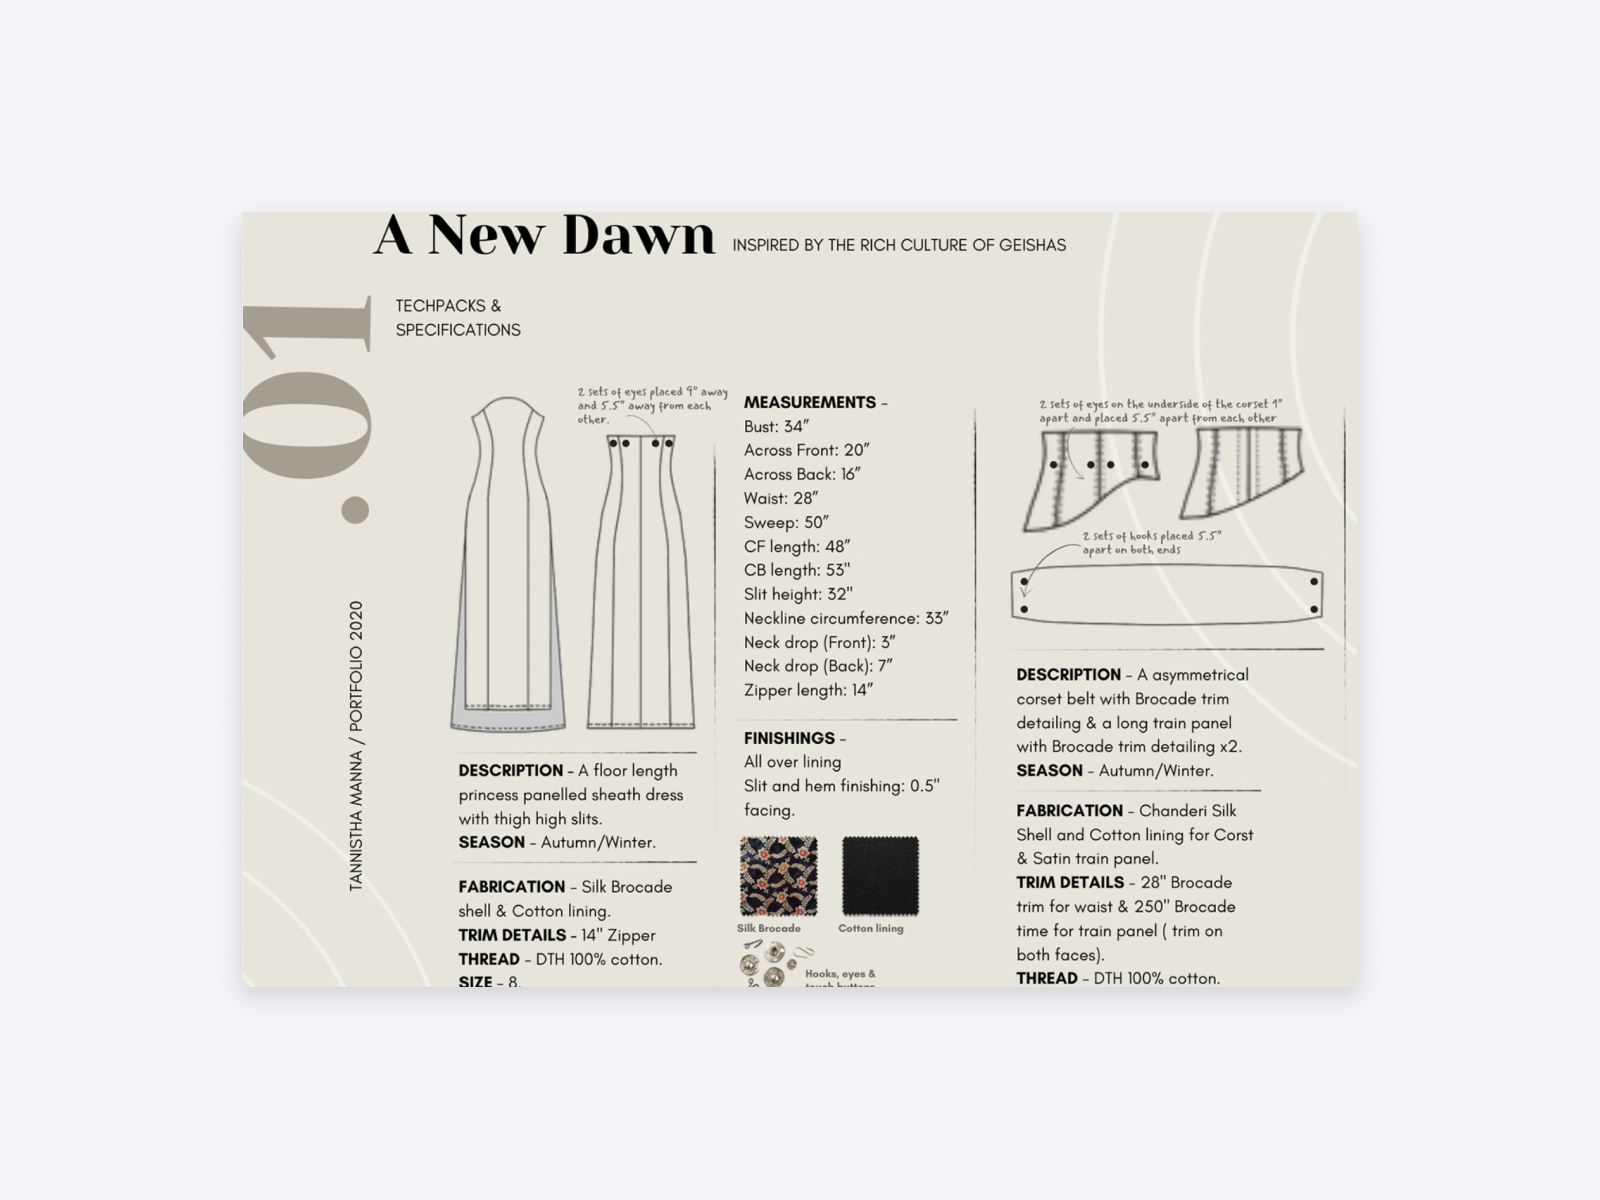 Tannistha's detailed dress specifications, and sketches.